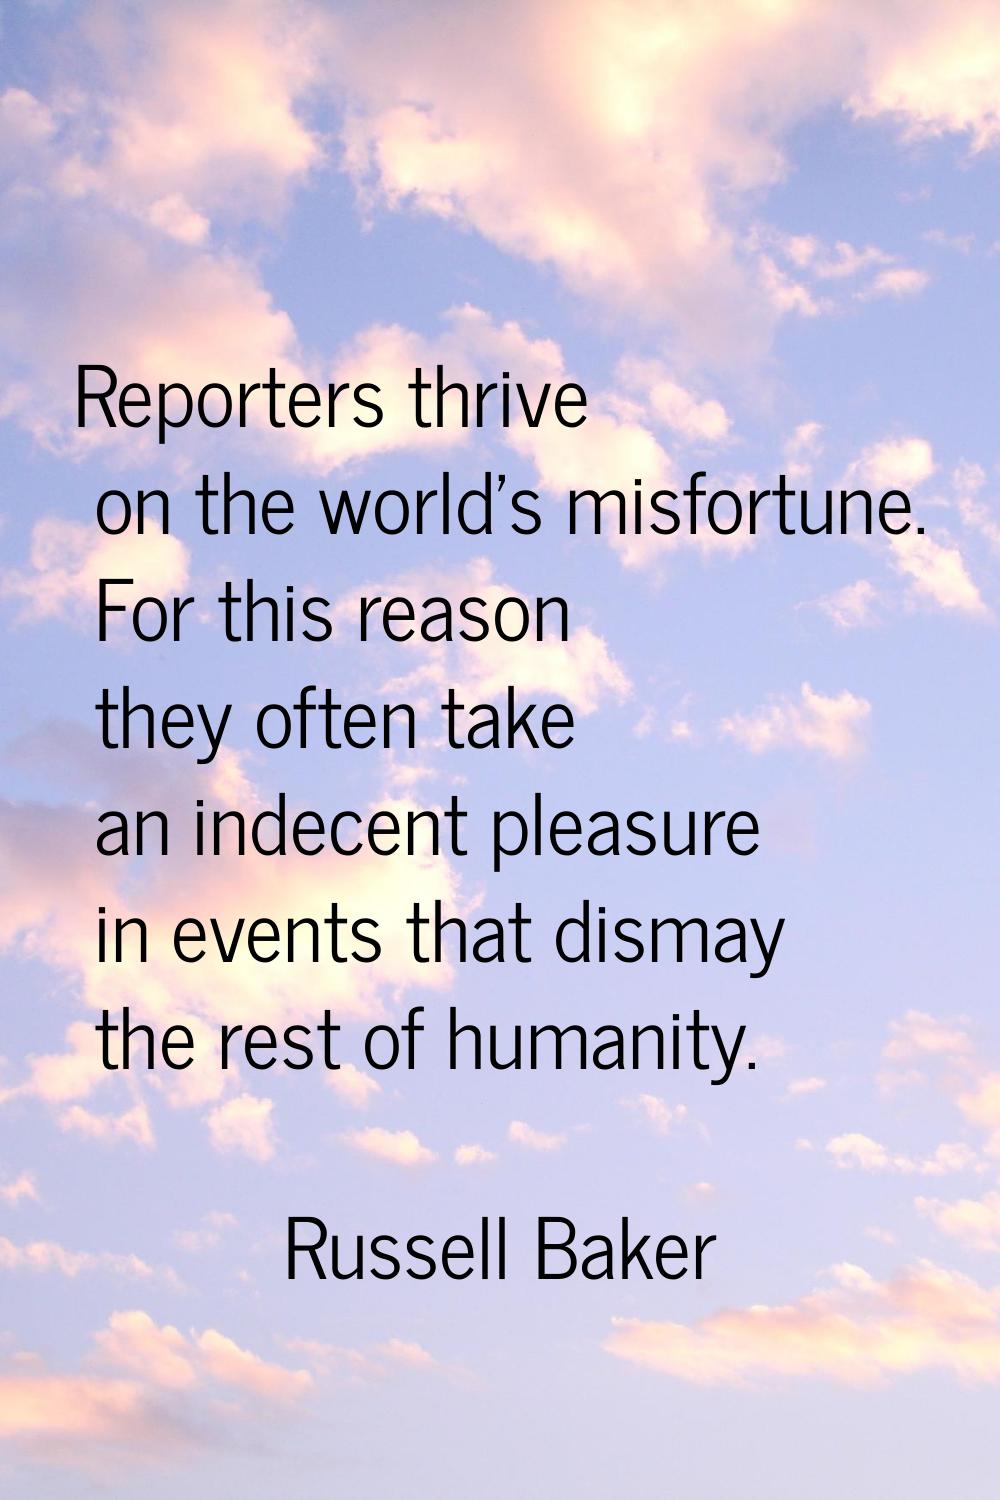 Reporters thrive on the world's misfortune. For this reason they often take an indecent pleasure in